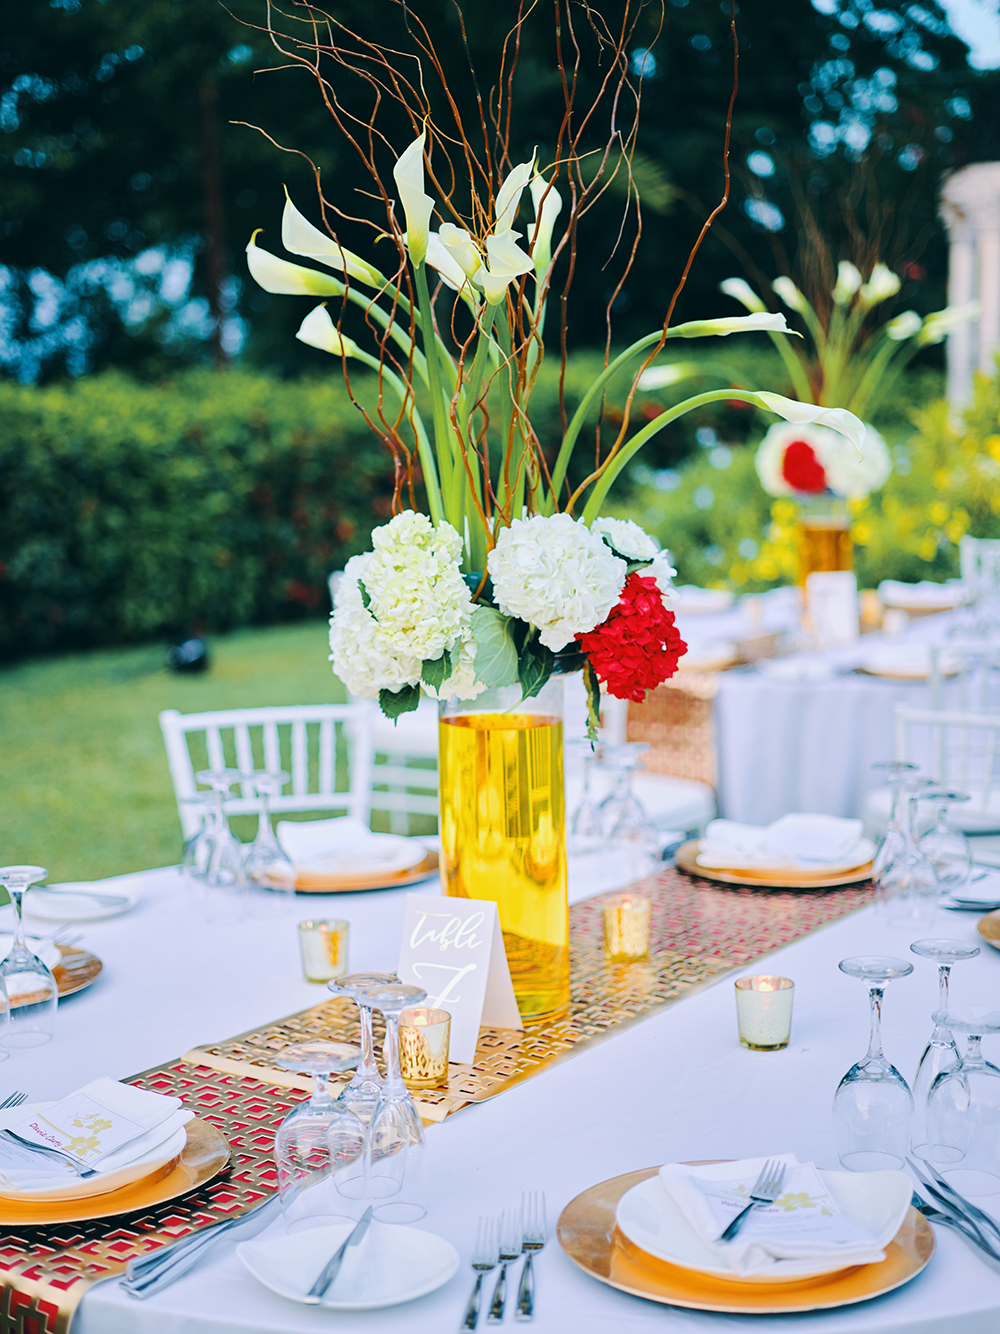 wedding reception decor - outdoors - red - gold - white